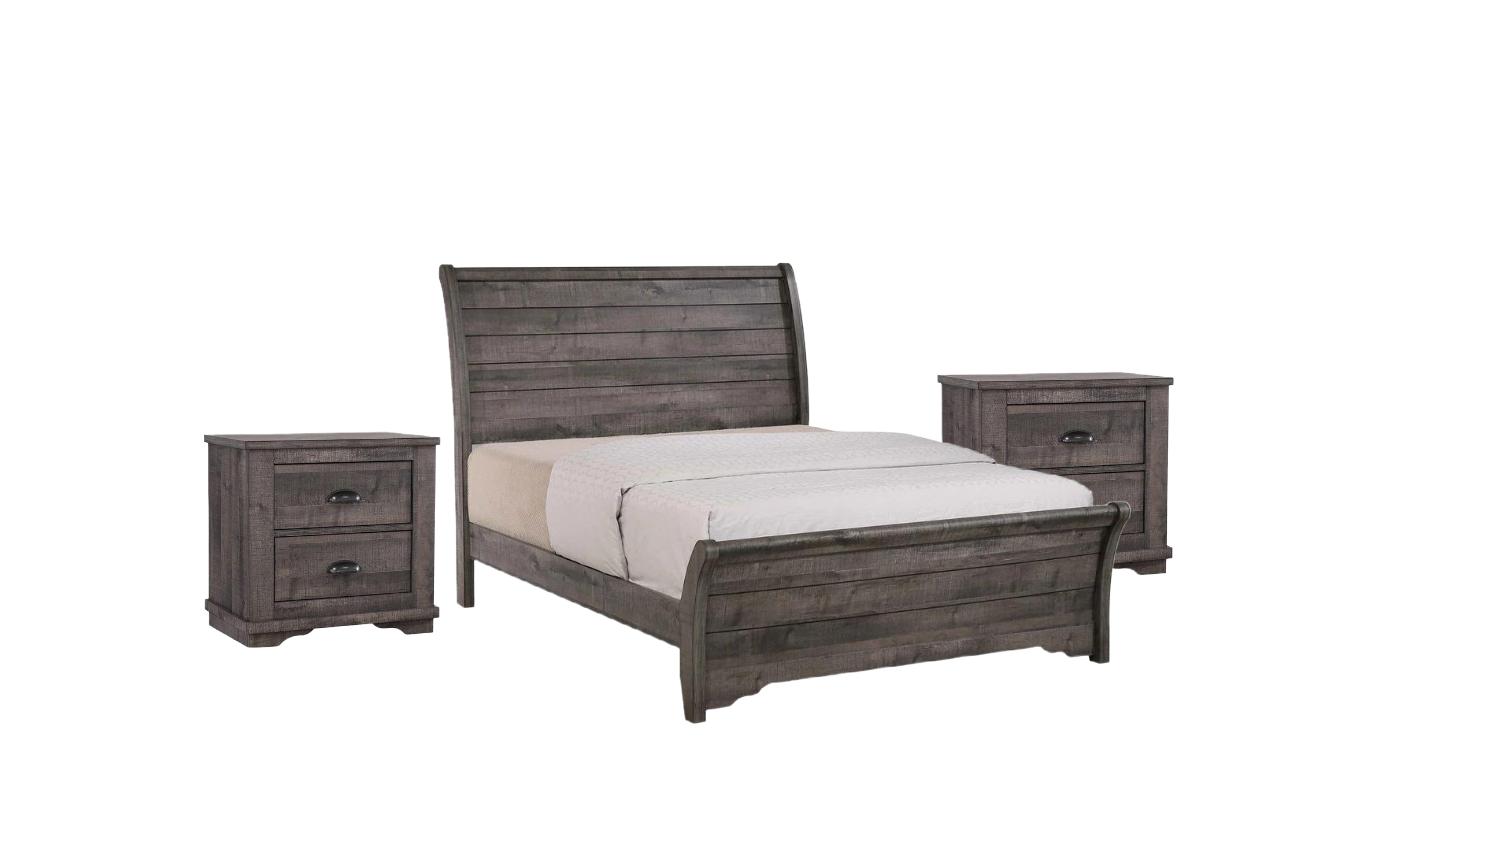 Traditional, Rustic Panel Bedroom Set Coralee B8100-K-Bed-3pcs in Gray 